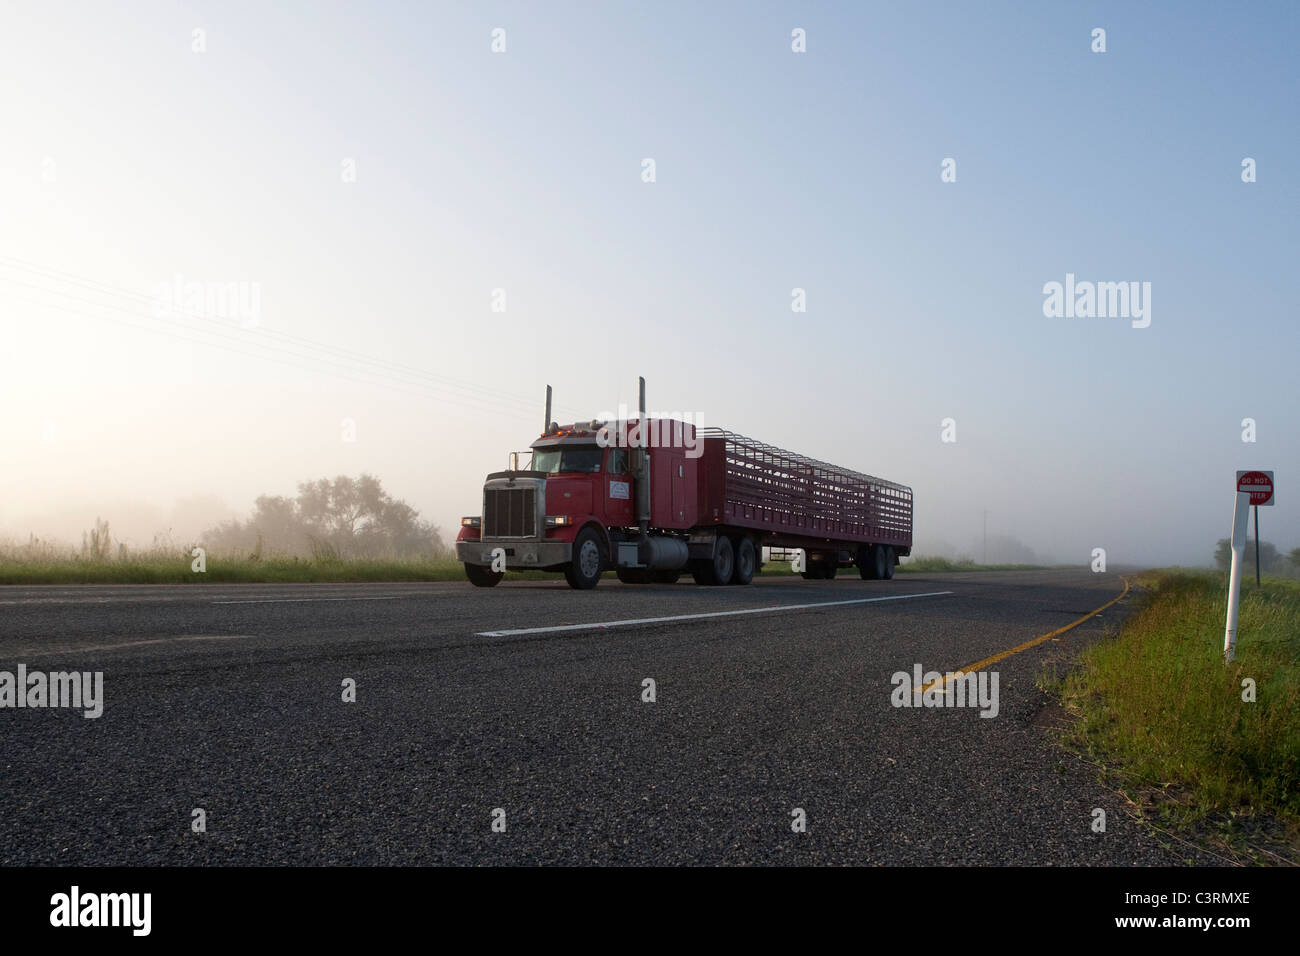 Tractor-trailer travels on US Highway 77 between Raymondville and Kingsville in South Texas USA Stock Photo